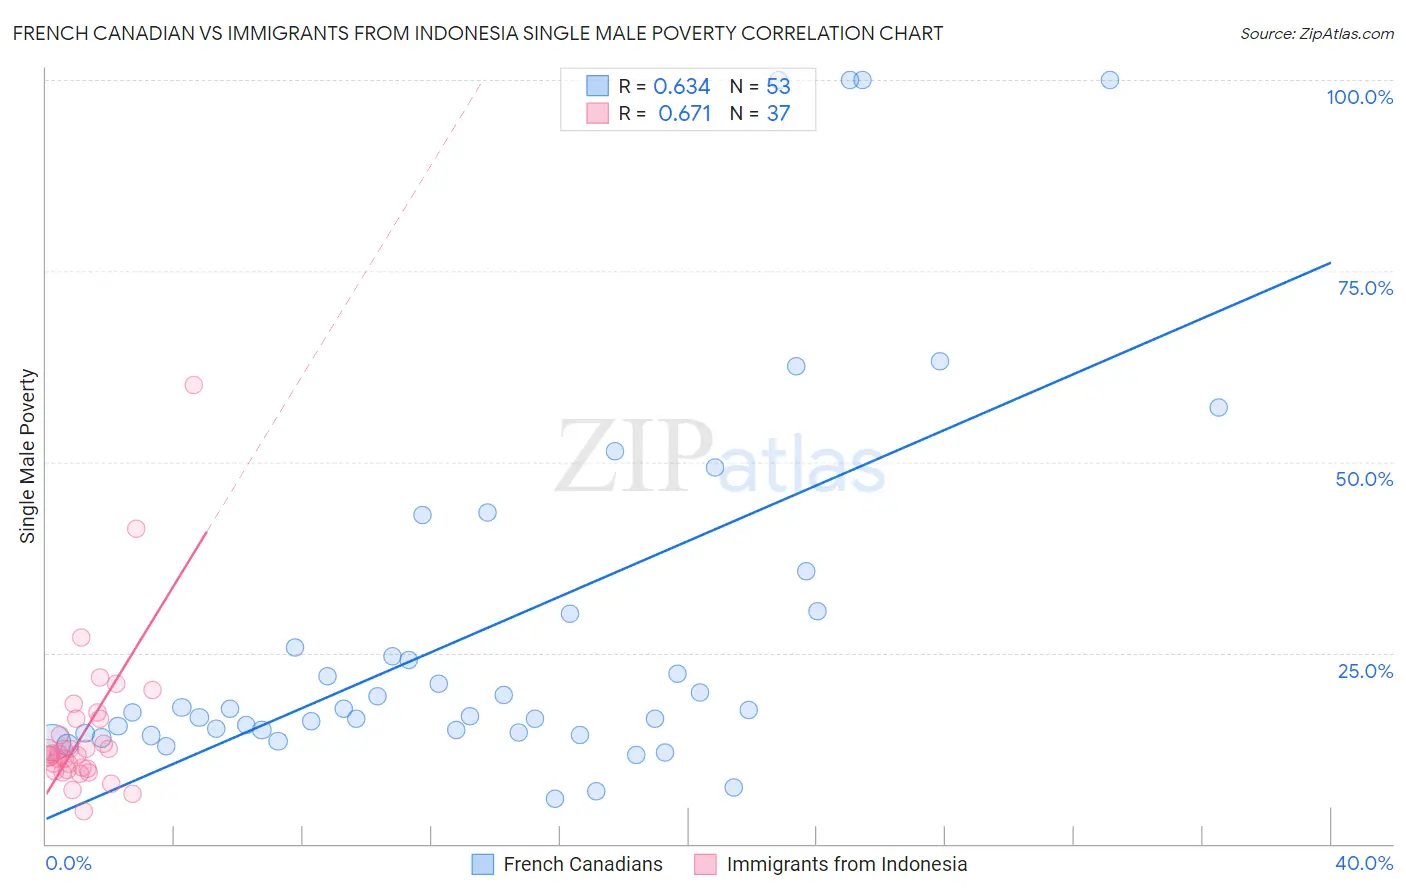 French Canadian vs Immigrants from Indonesia Single Male Poverty